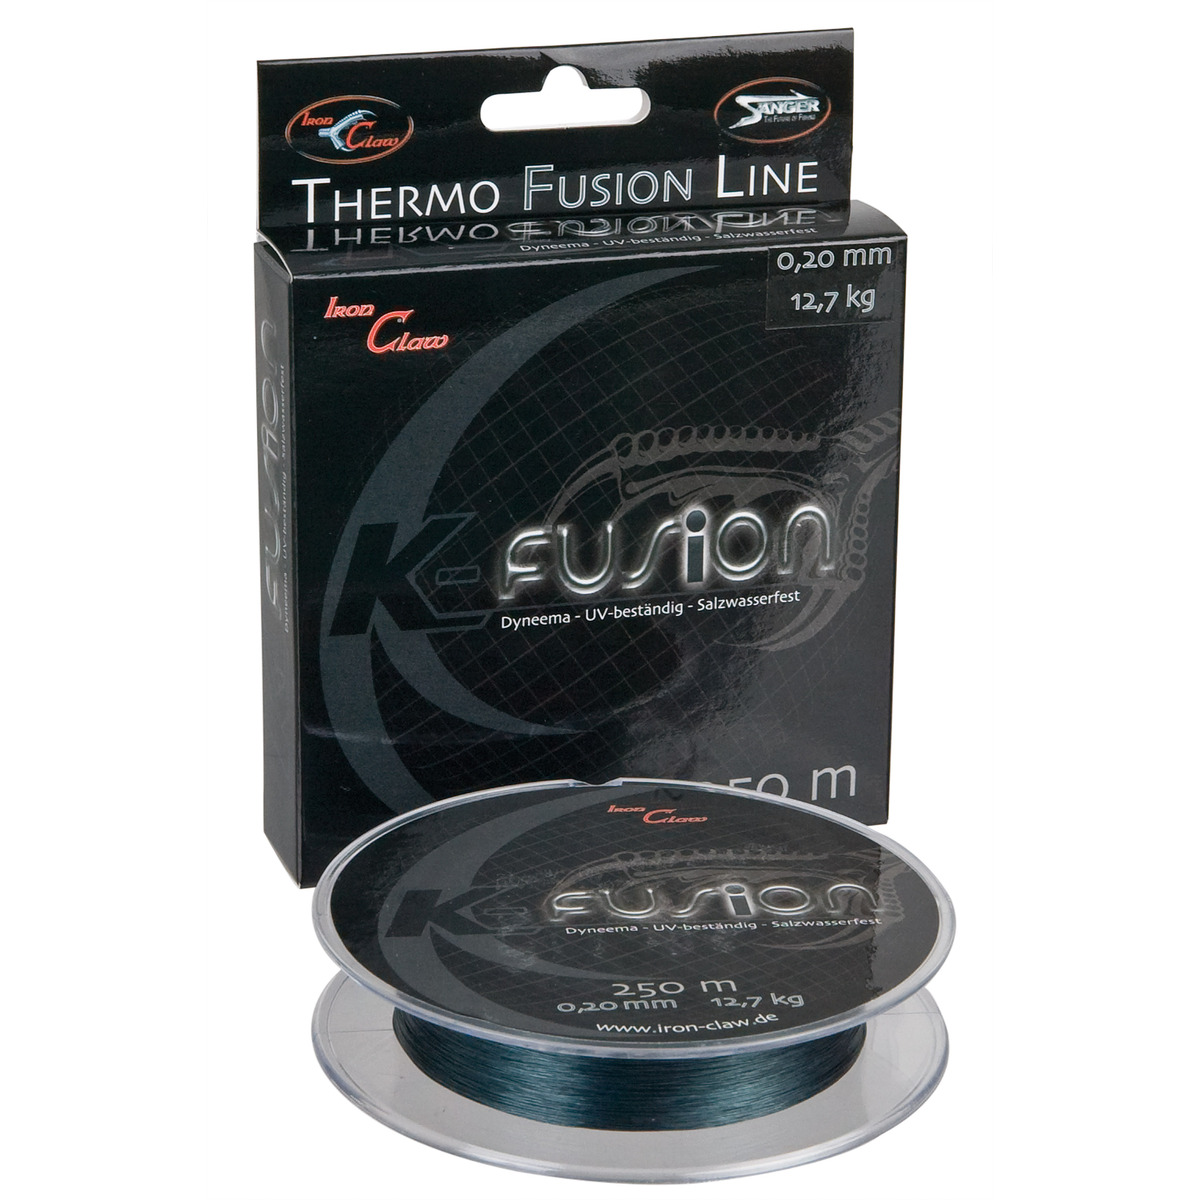 Iron Claw K-fusion G - 0.13 mm - 1000 m